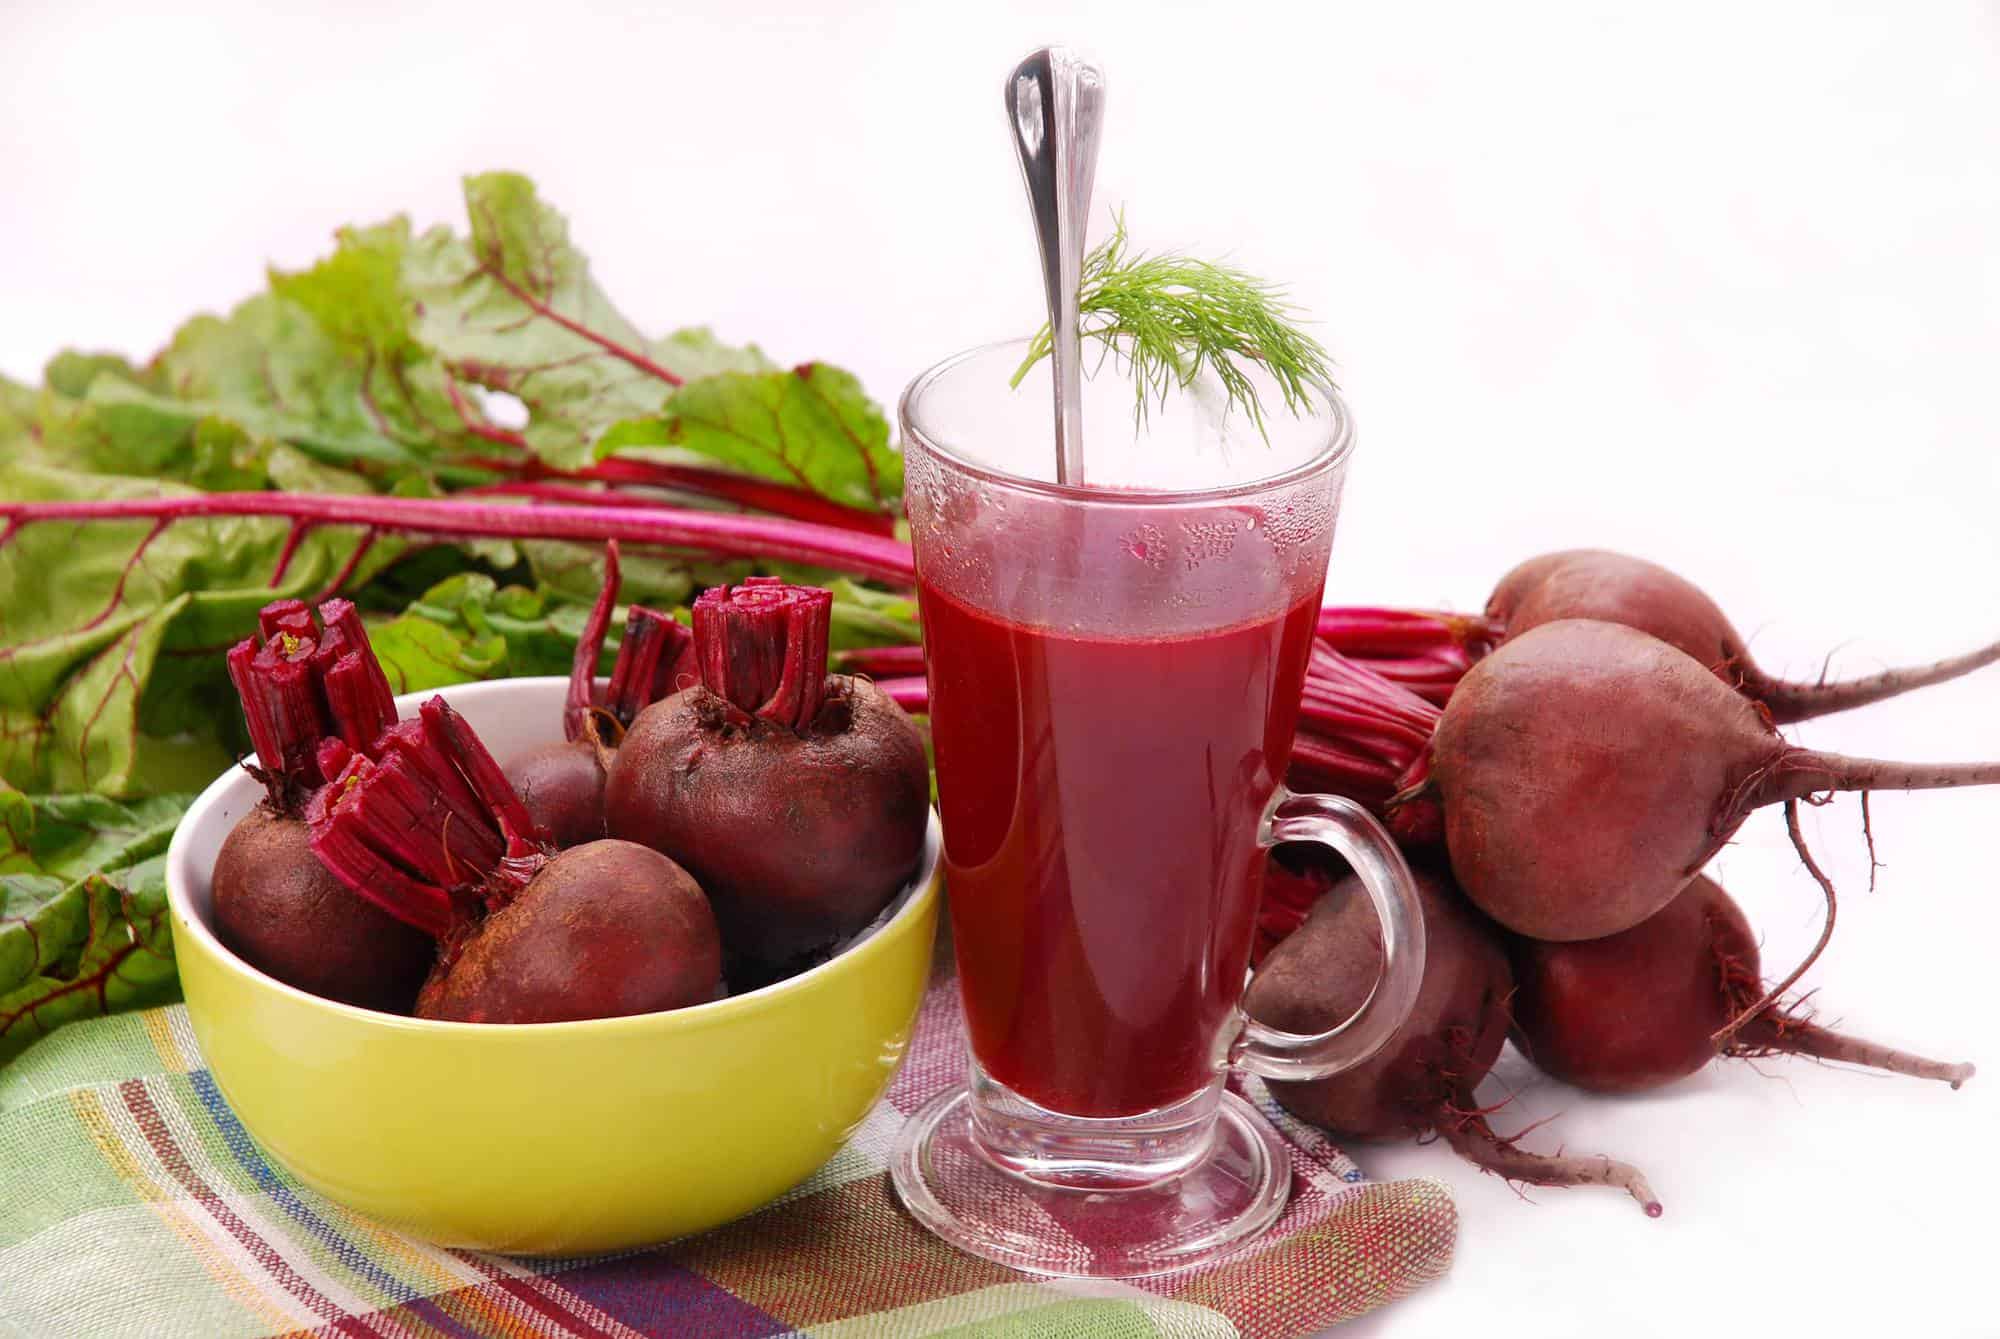 Benefits of beetroot juice for the body "Beetroot" is a nutritious drink that you eat daily